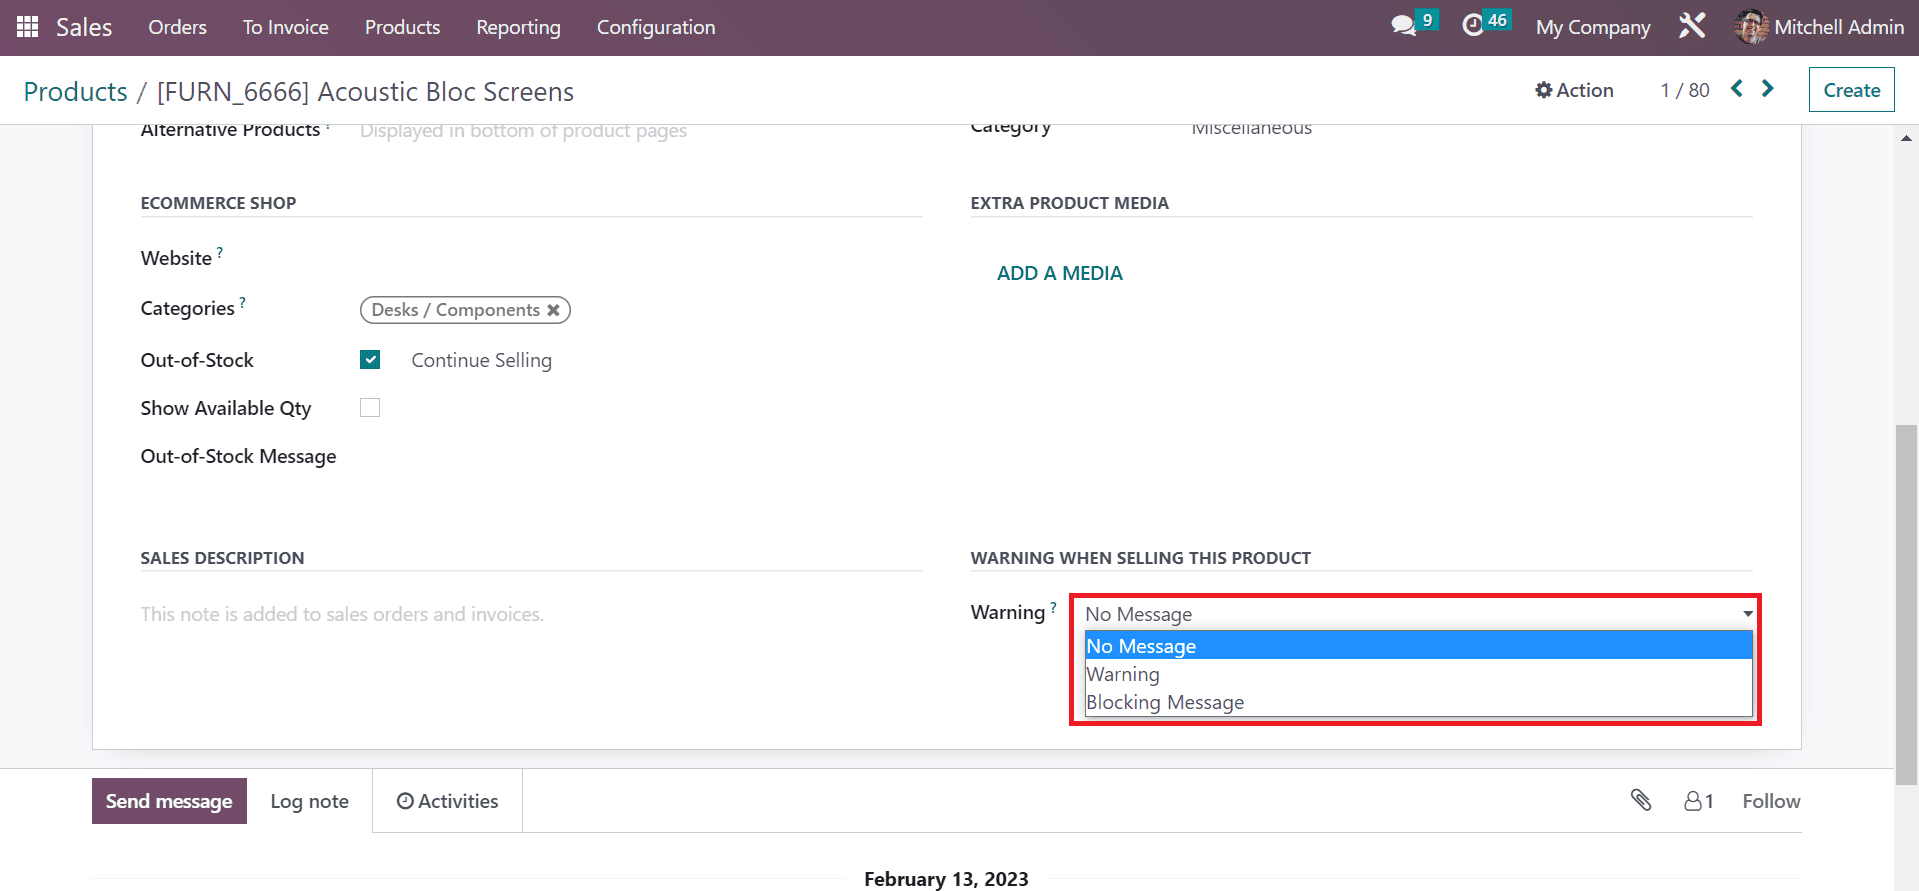 how-to-get-warnings-in-orders-for-products-or-customers-in-odoo-16-5